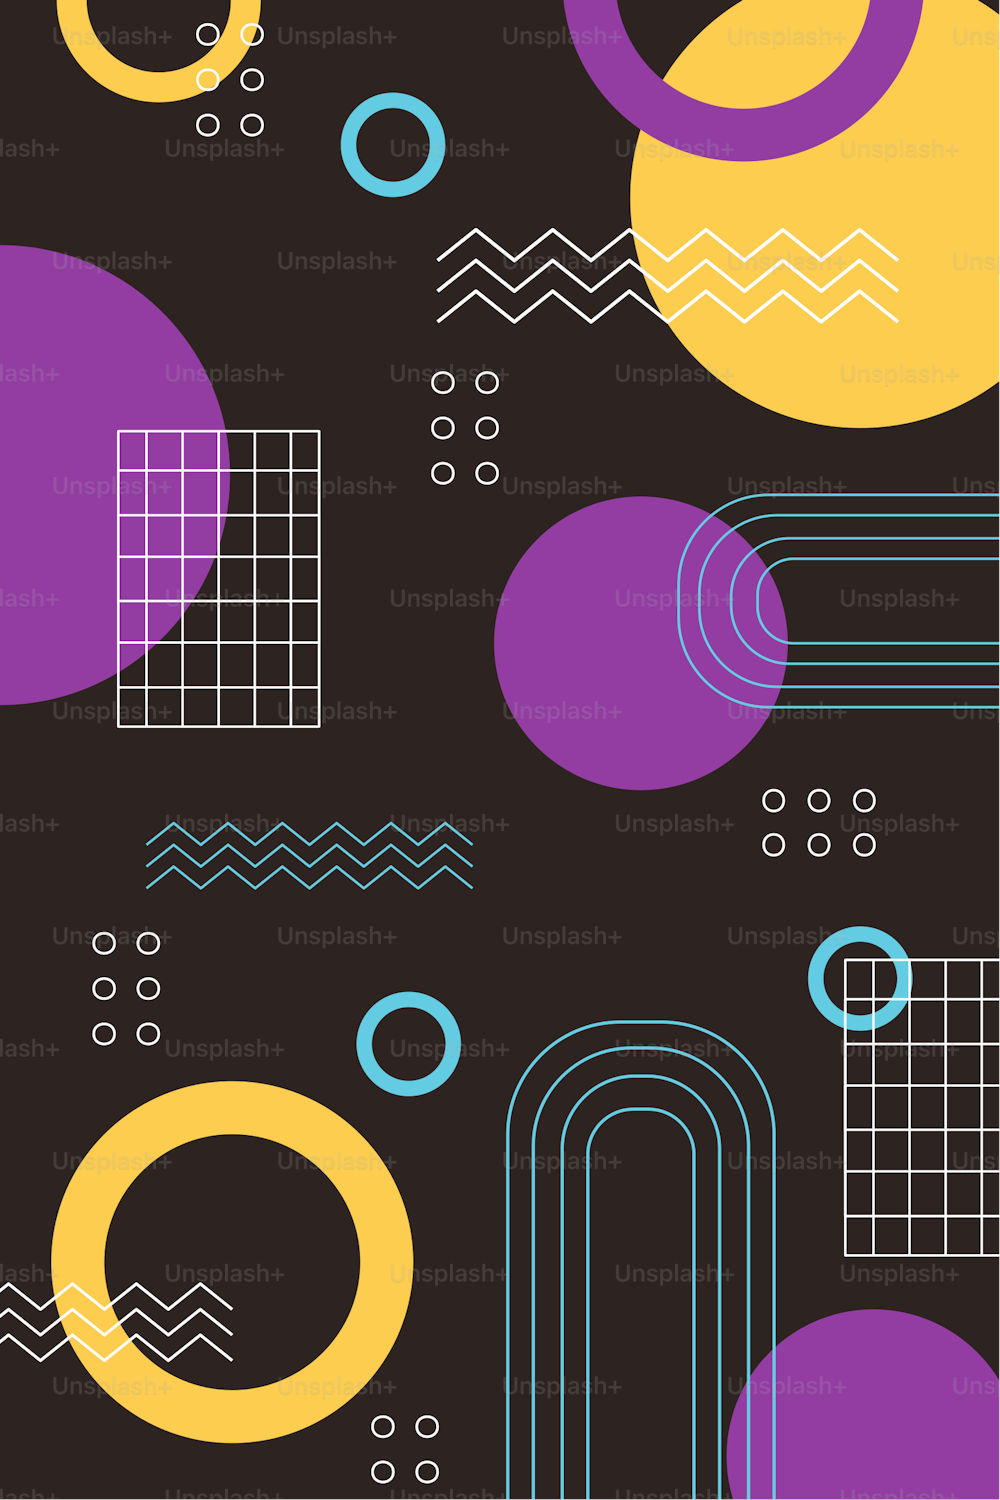 trendy geometric 80s 90s style abstract retro background design vector illustration